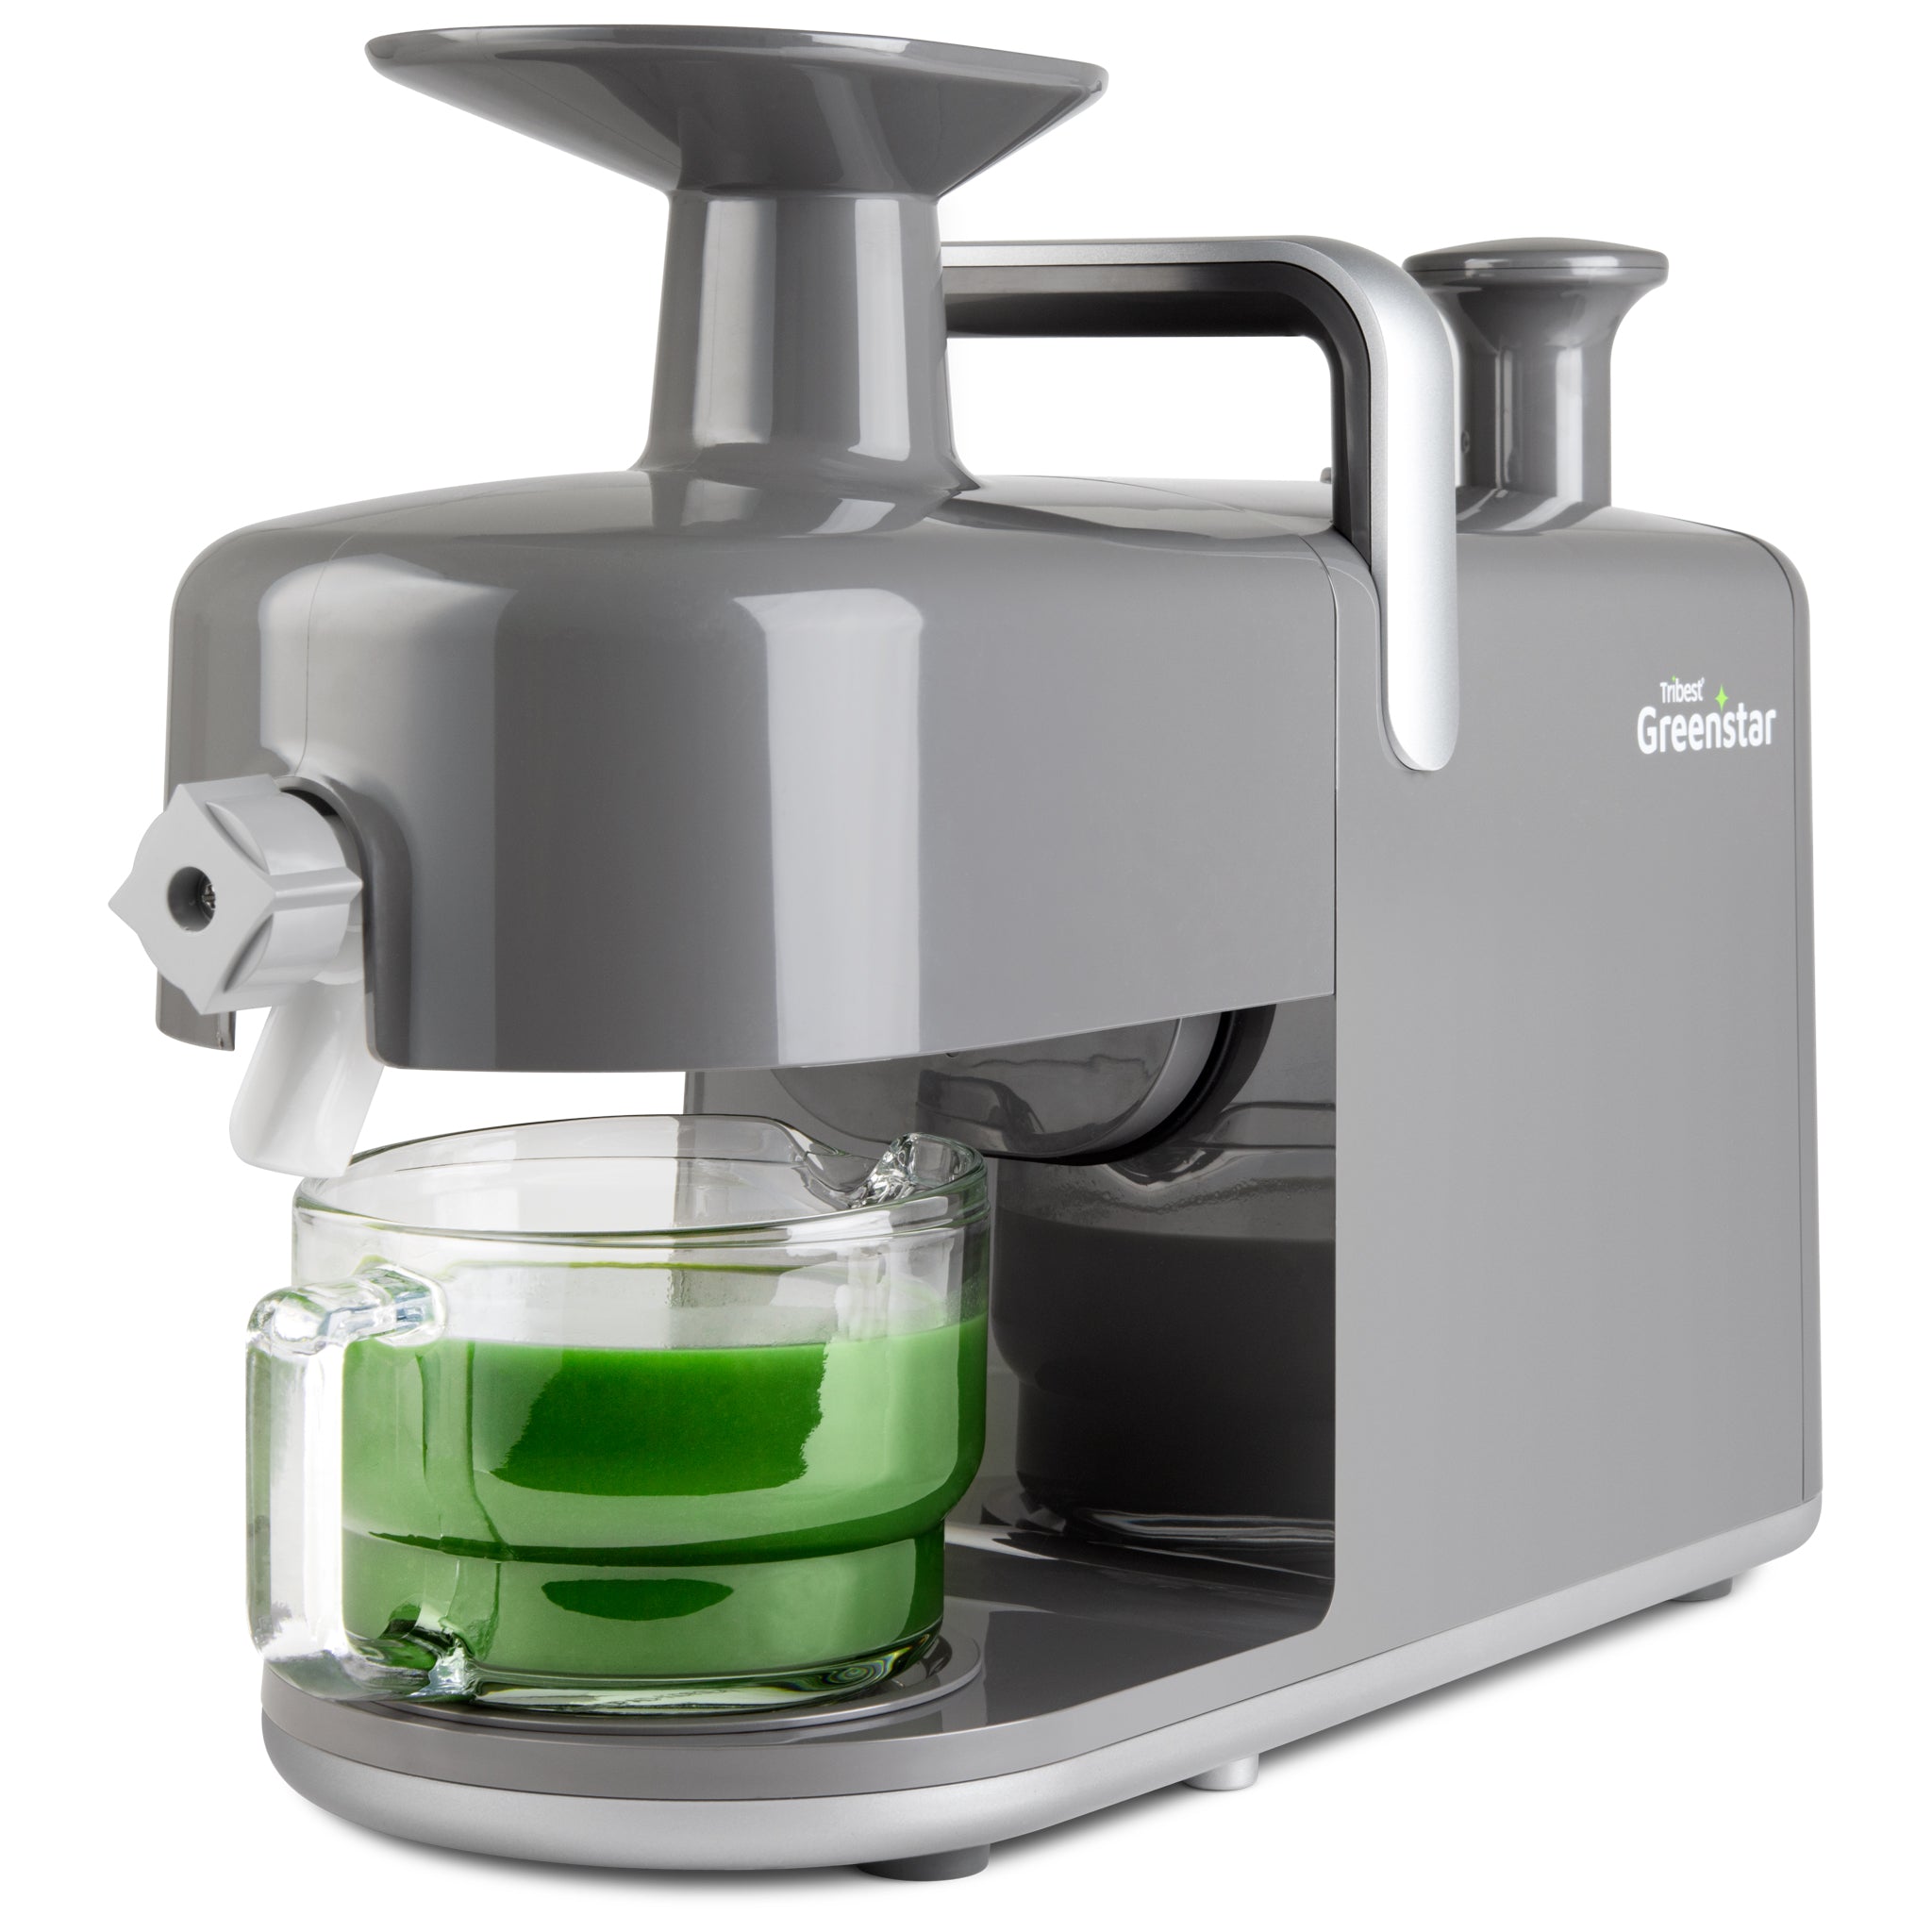 Shine Kitchen Co.® Easy Cold Press Juicer with XL Feed Chute